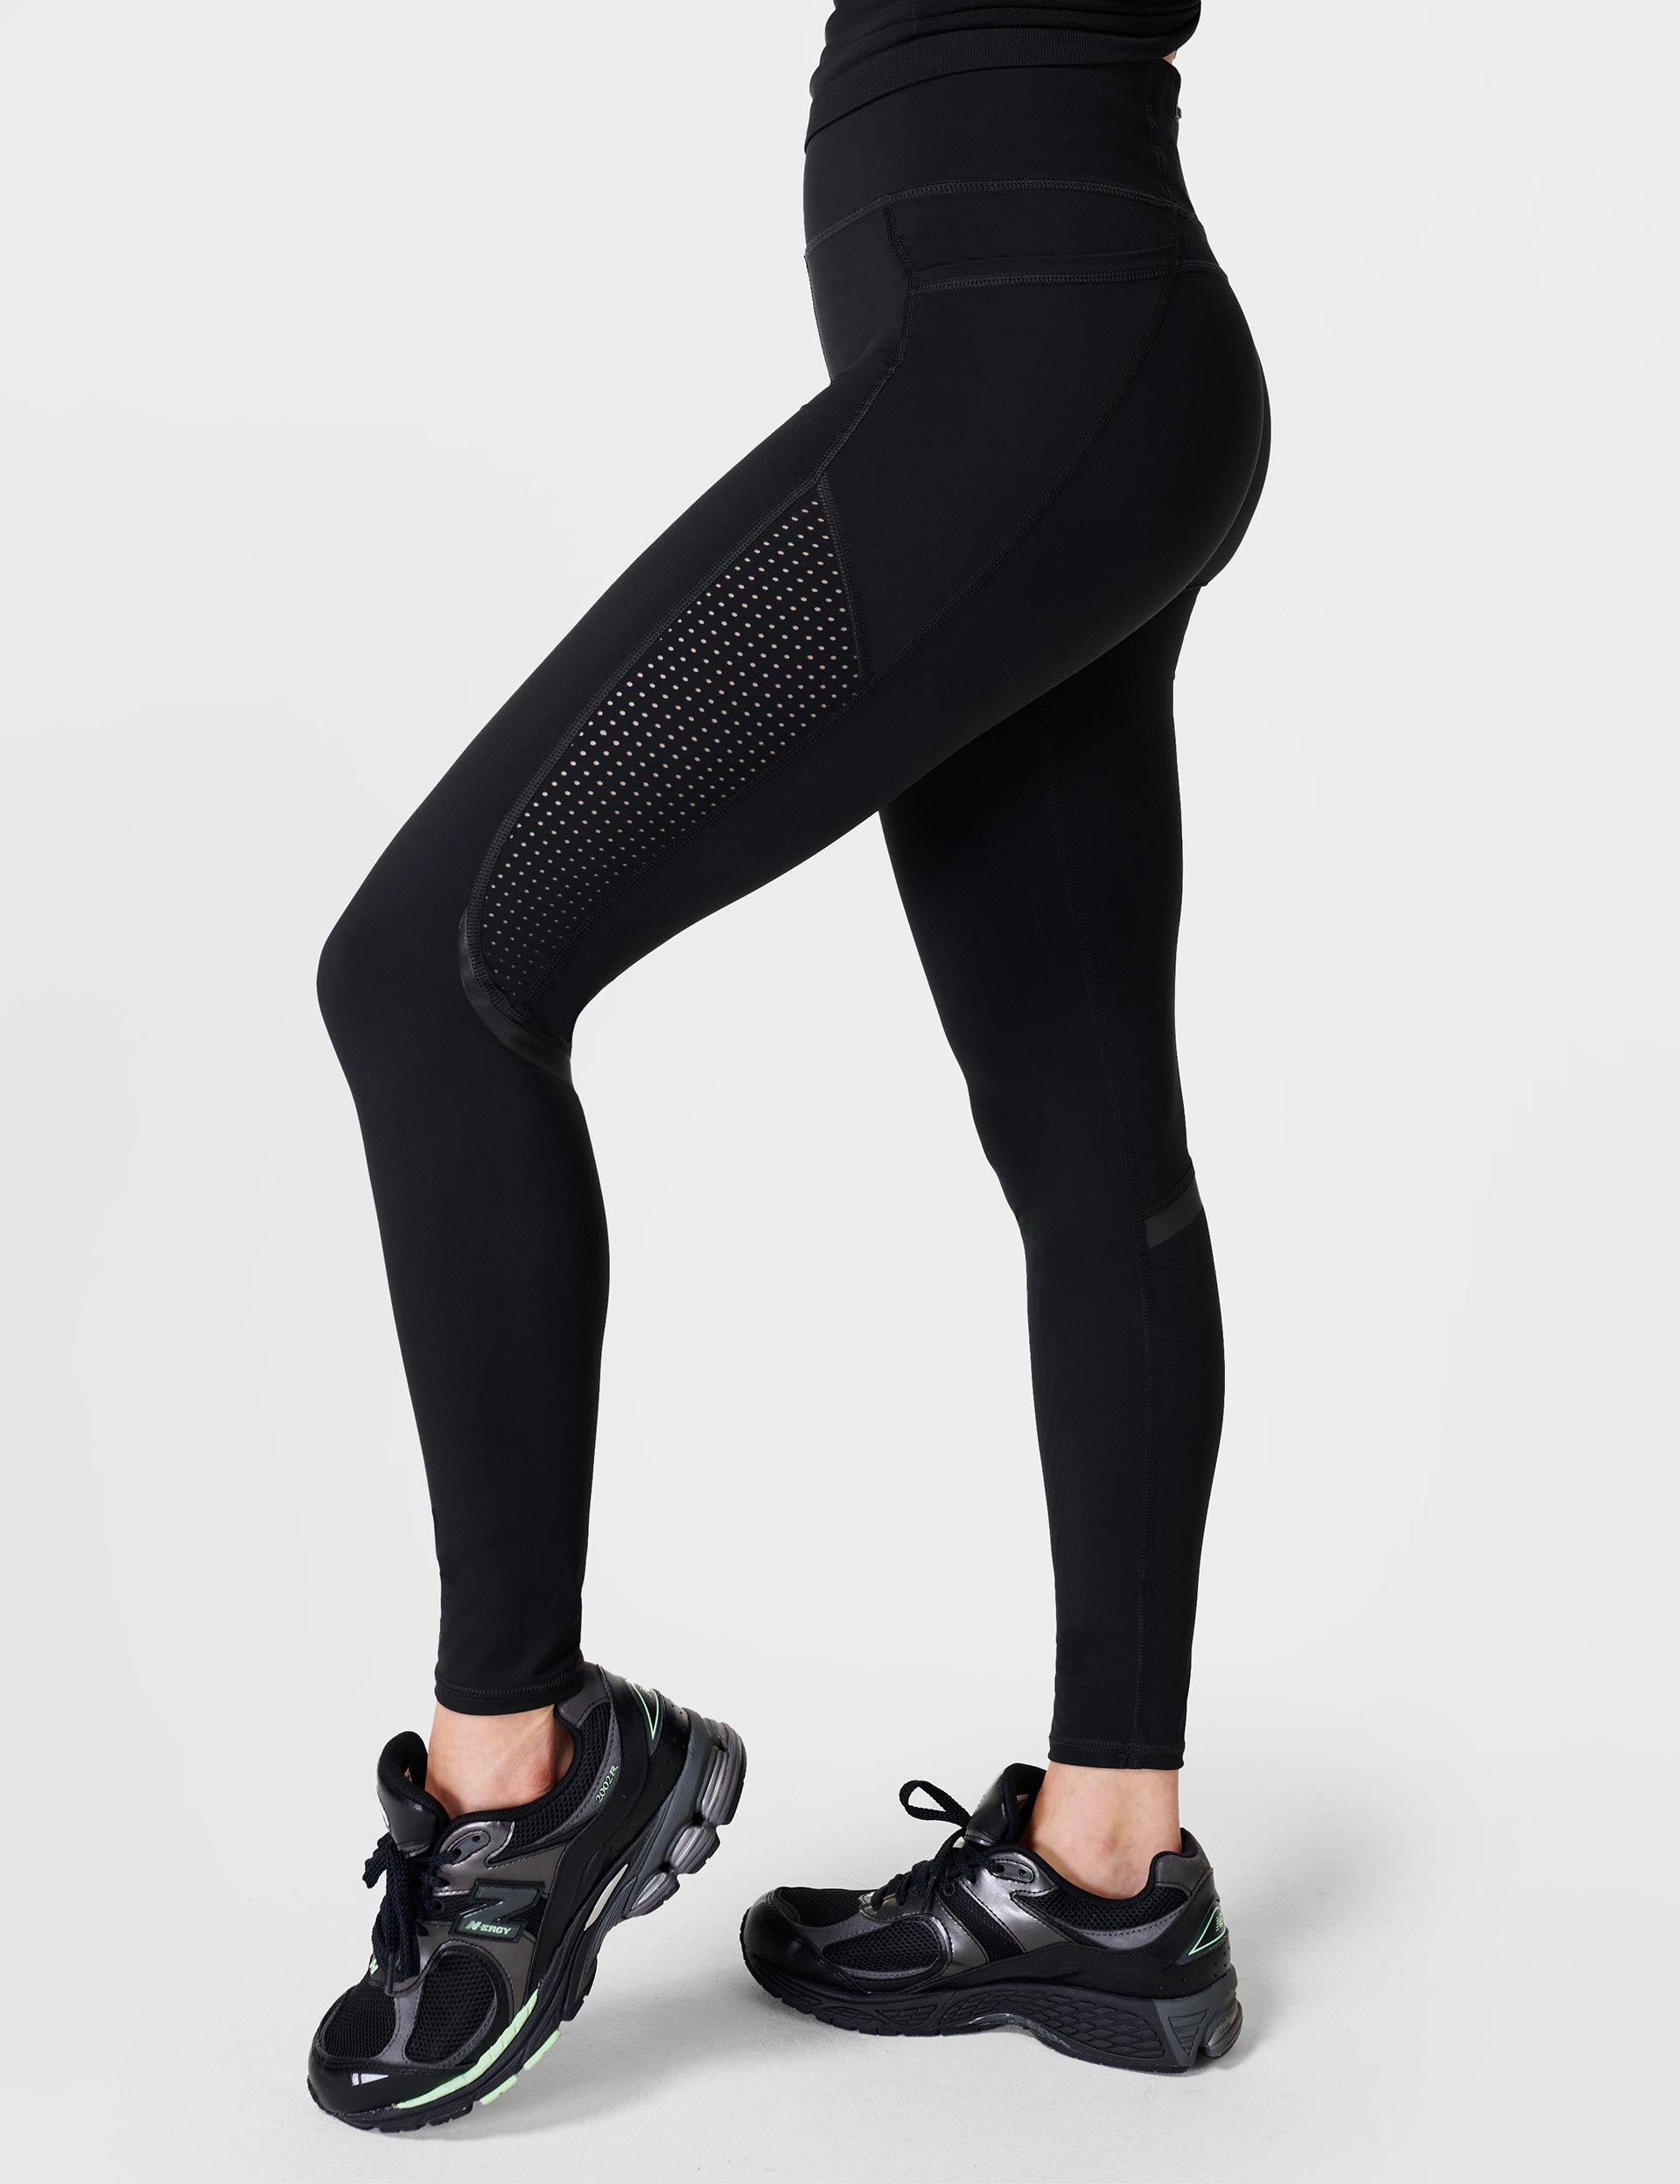 Under Armour Solid Black Leggings Size M - 59% off